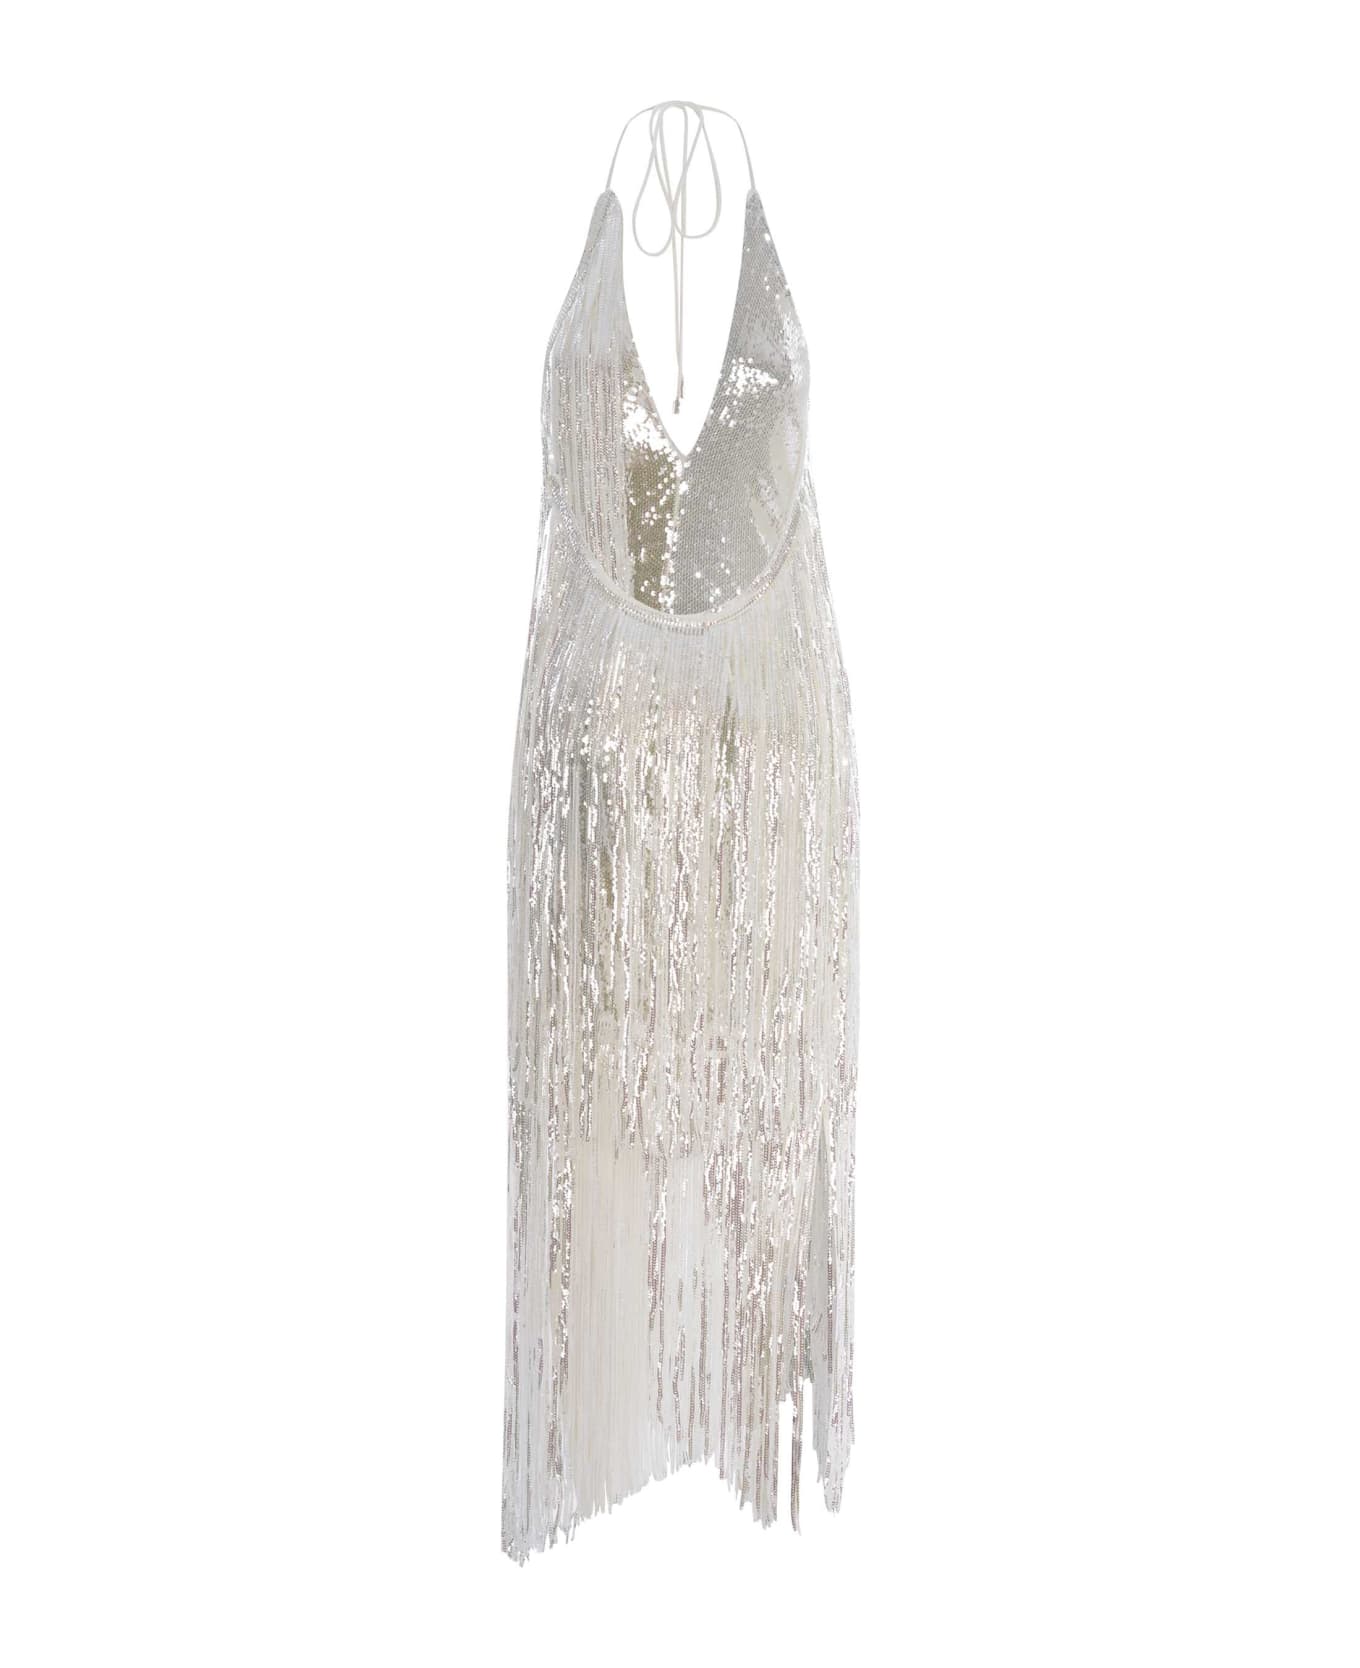 Rotate by Birger Christensen Dress Rotate Made With Fringes And Sequins - Bianco